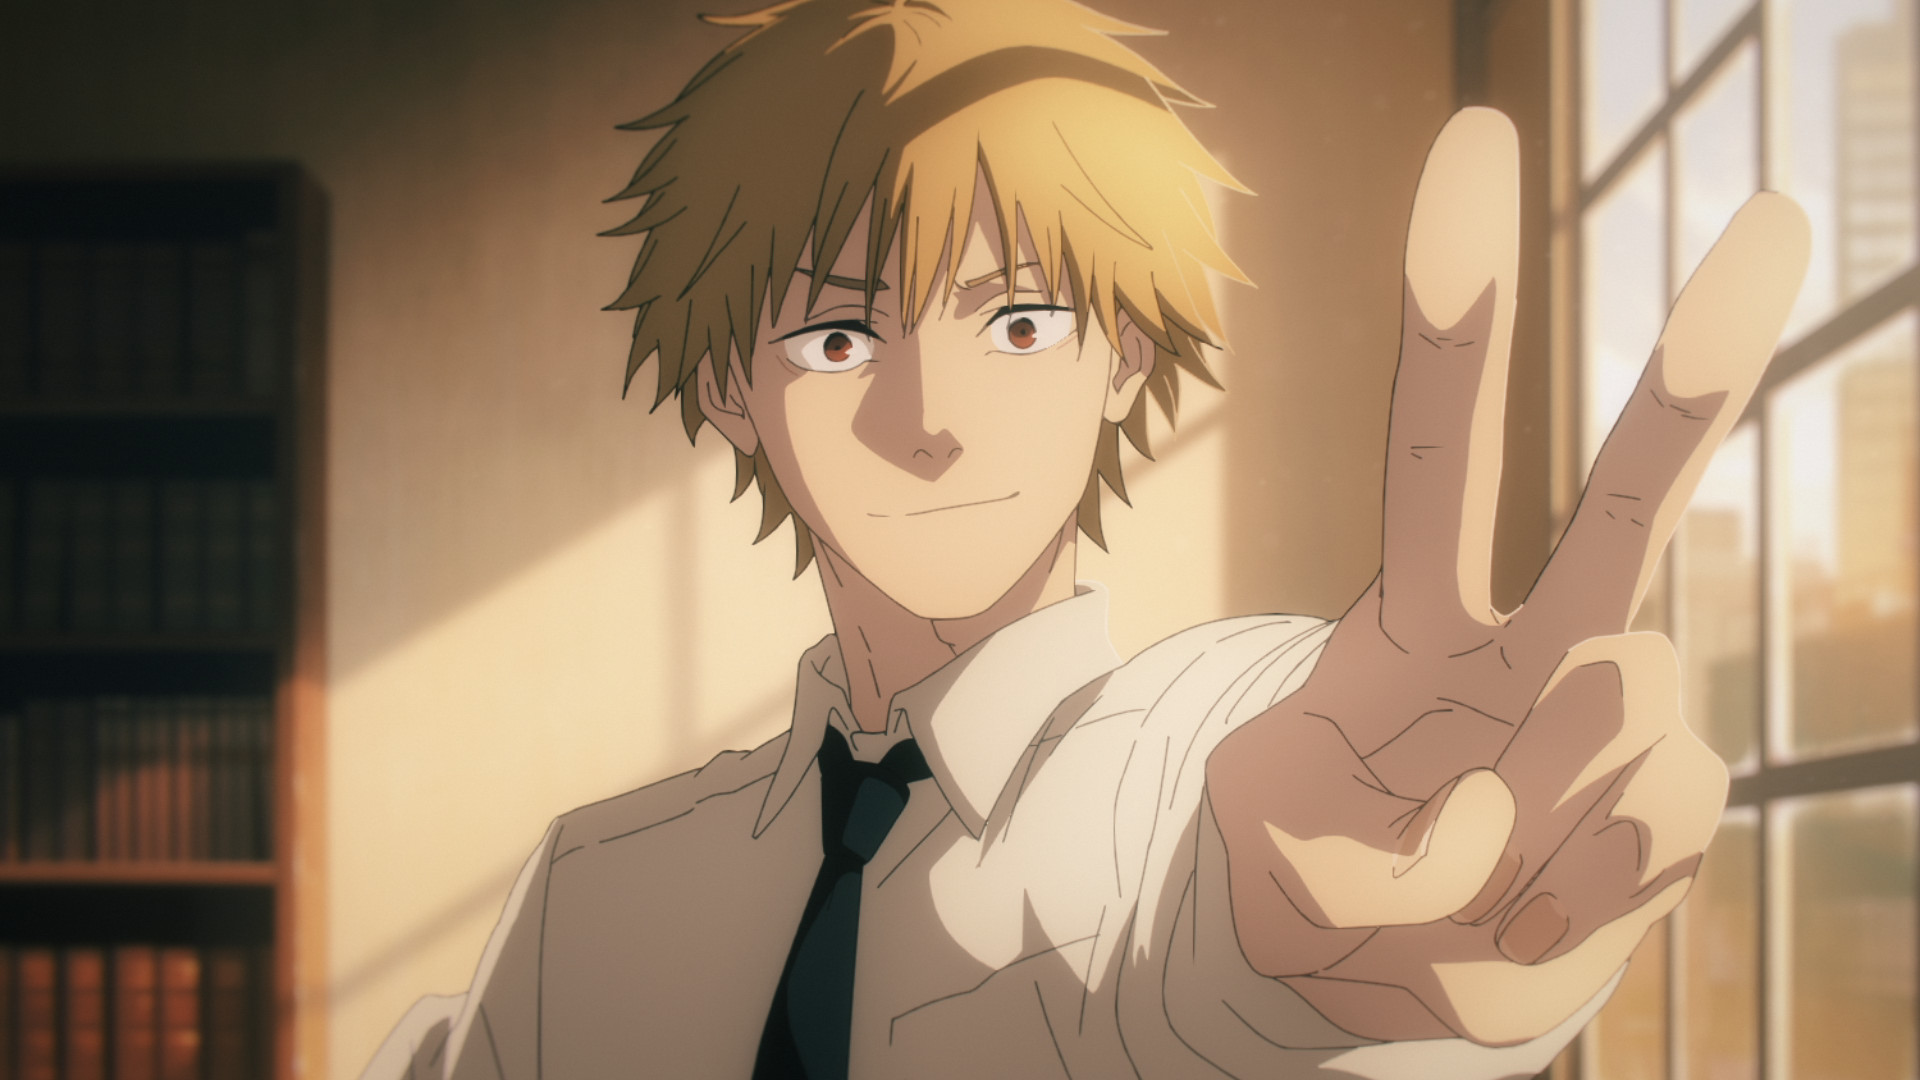 Denji in 'Chainsaw Man' for our article about episode 8. He's wearing a white shirt, black tie, and putting up a peace sign.